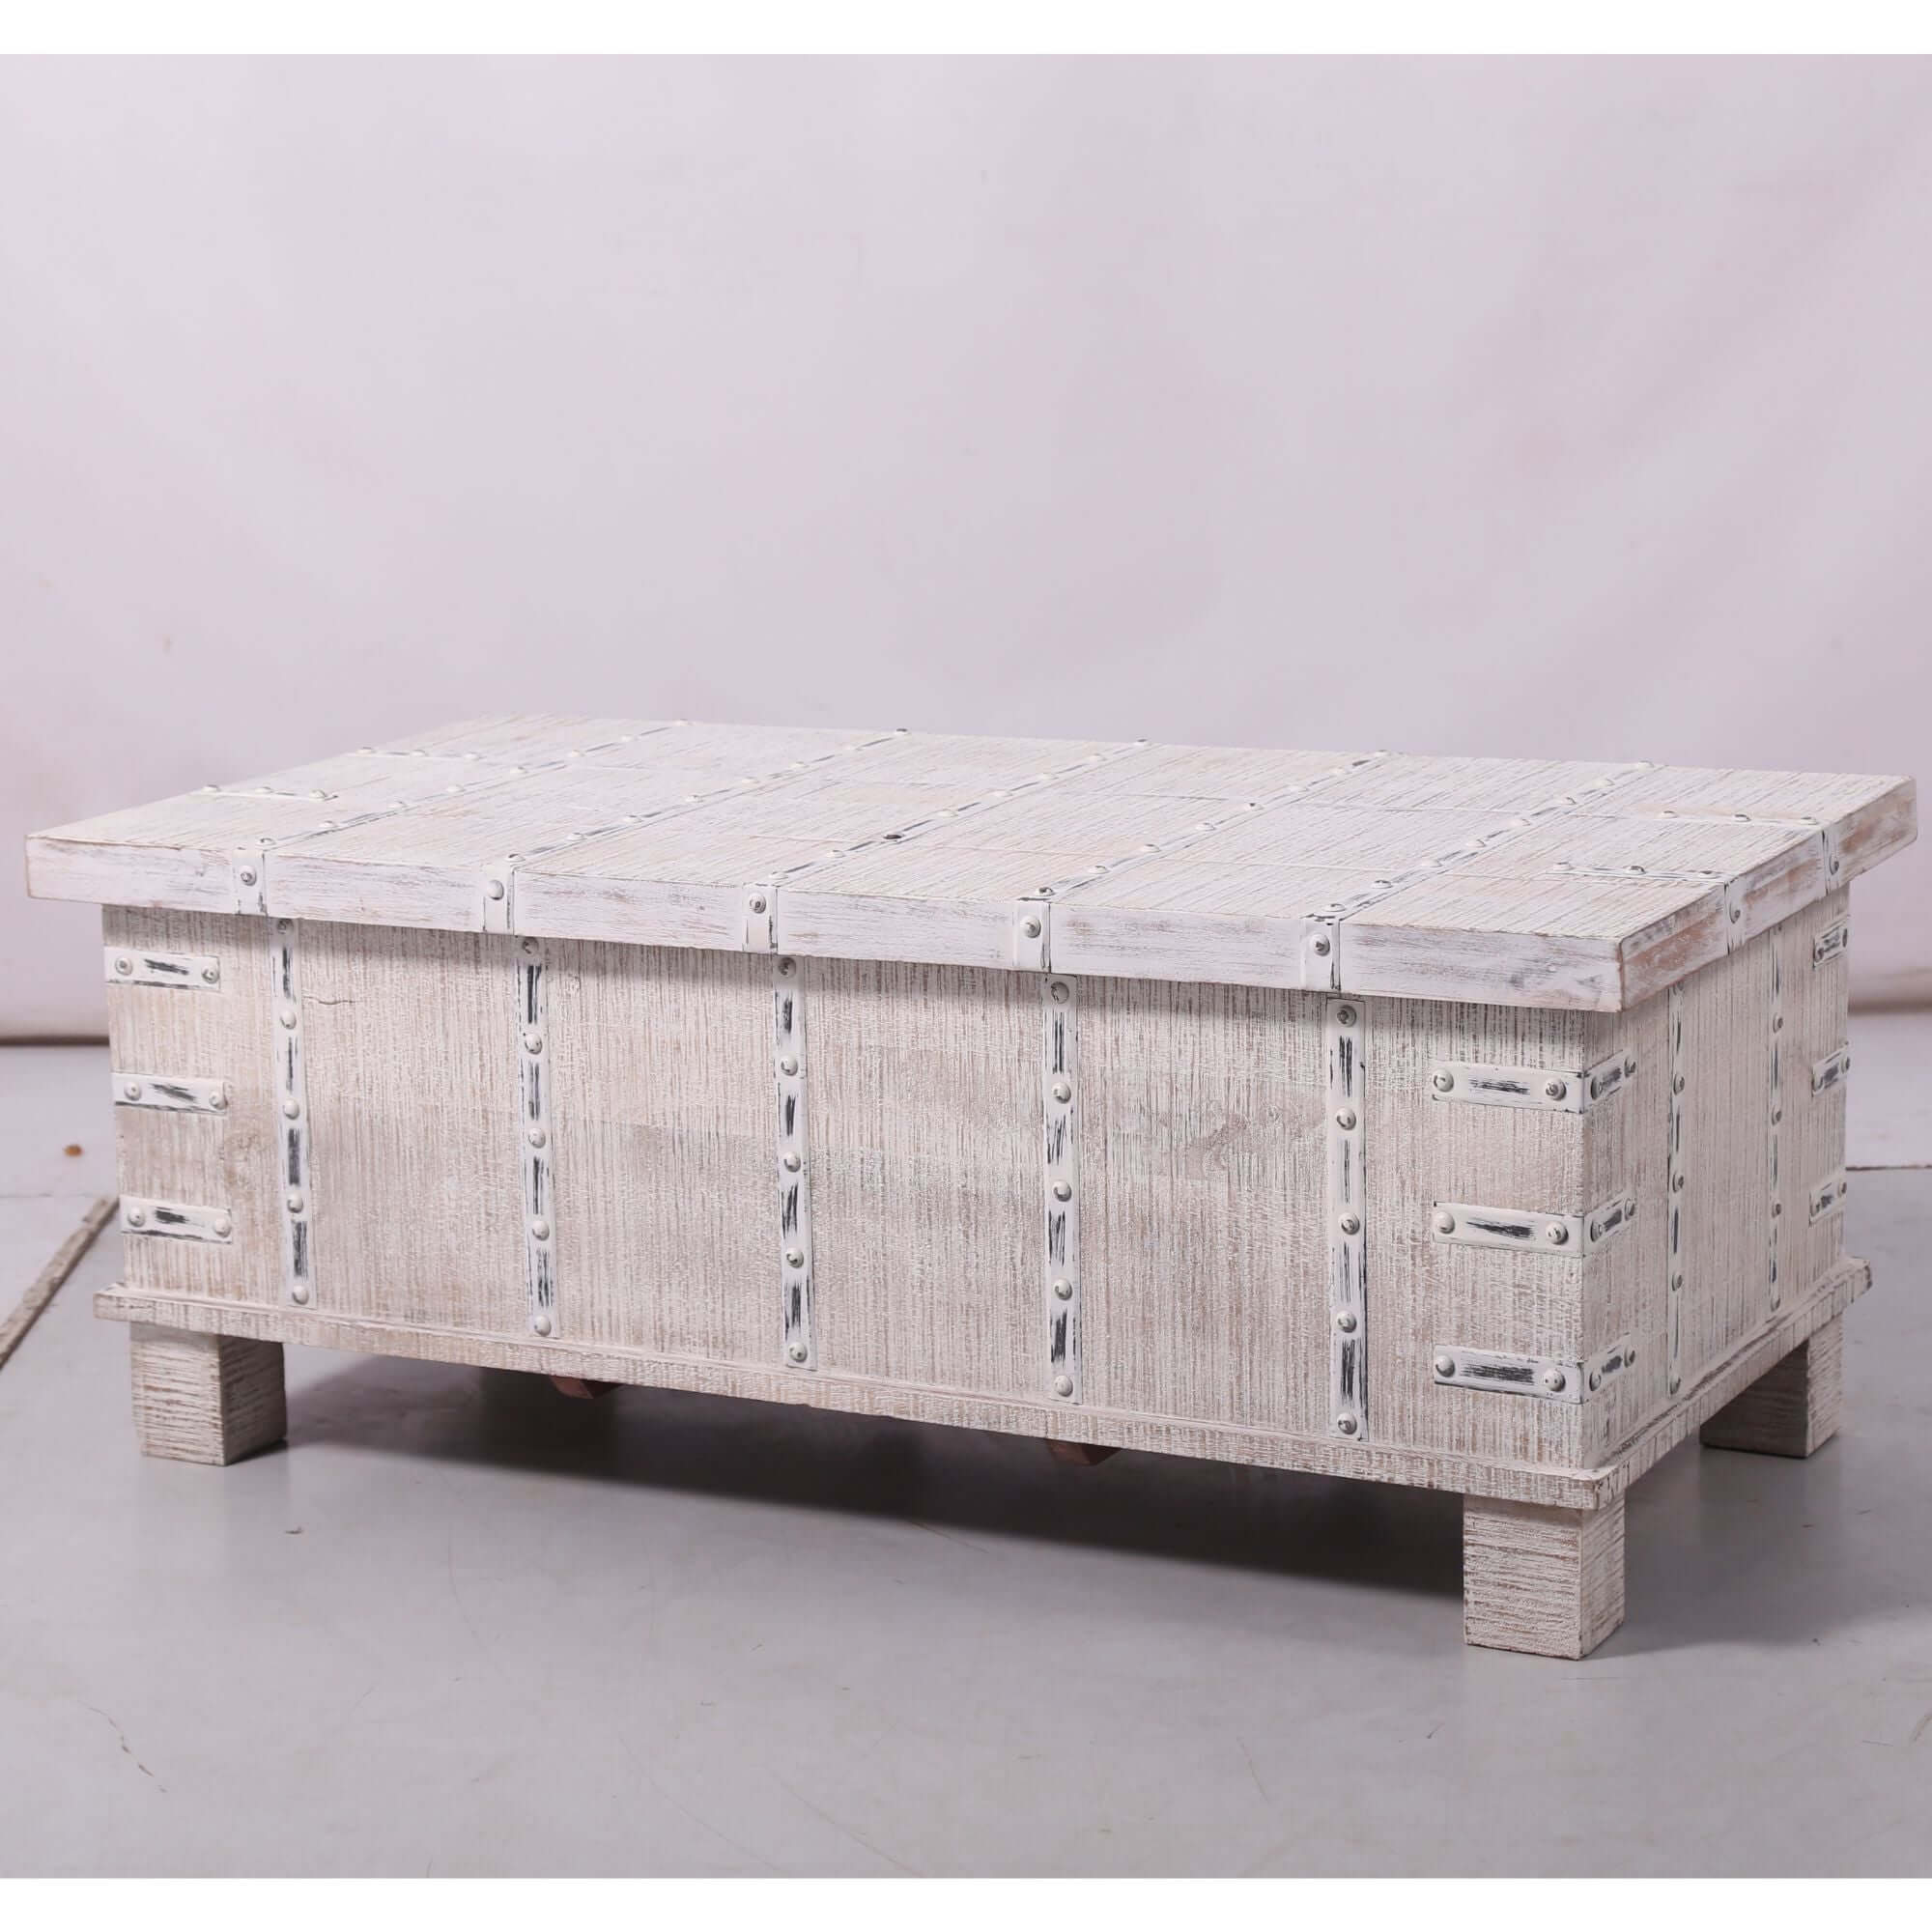 Handcrafted Daksh Coffee Table with Storage-Upinteriors